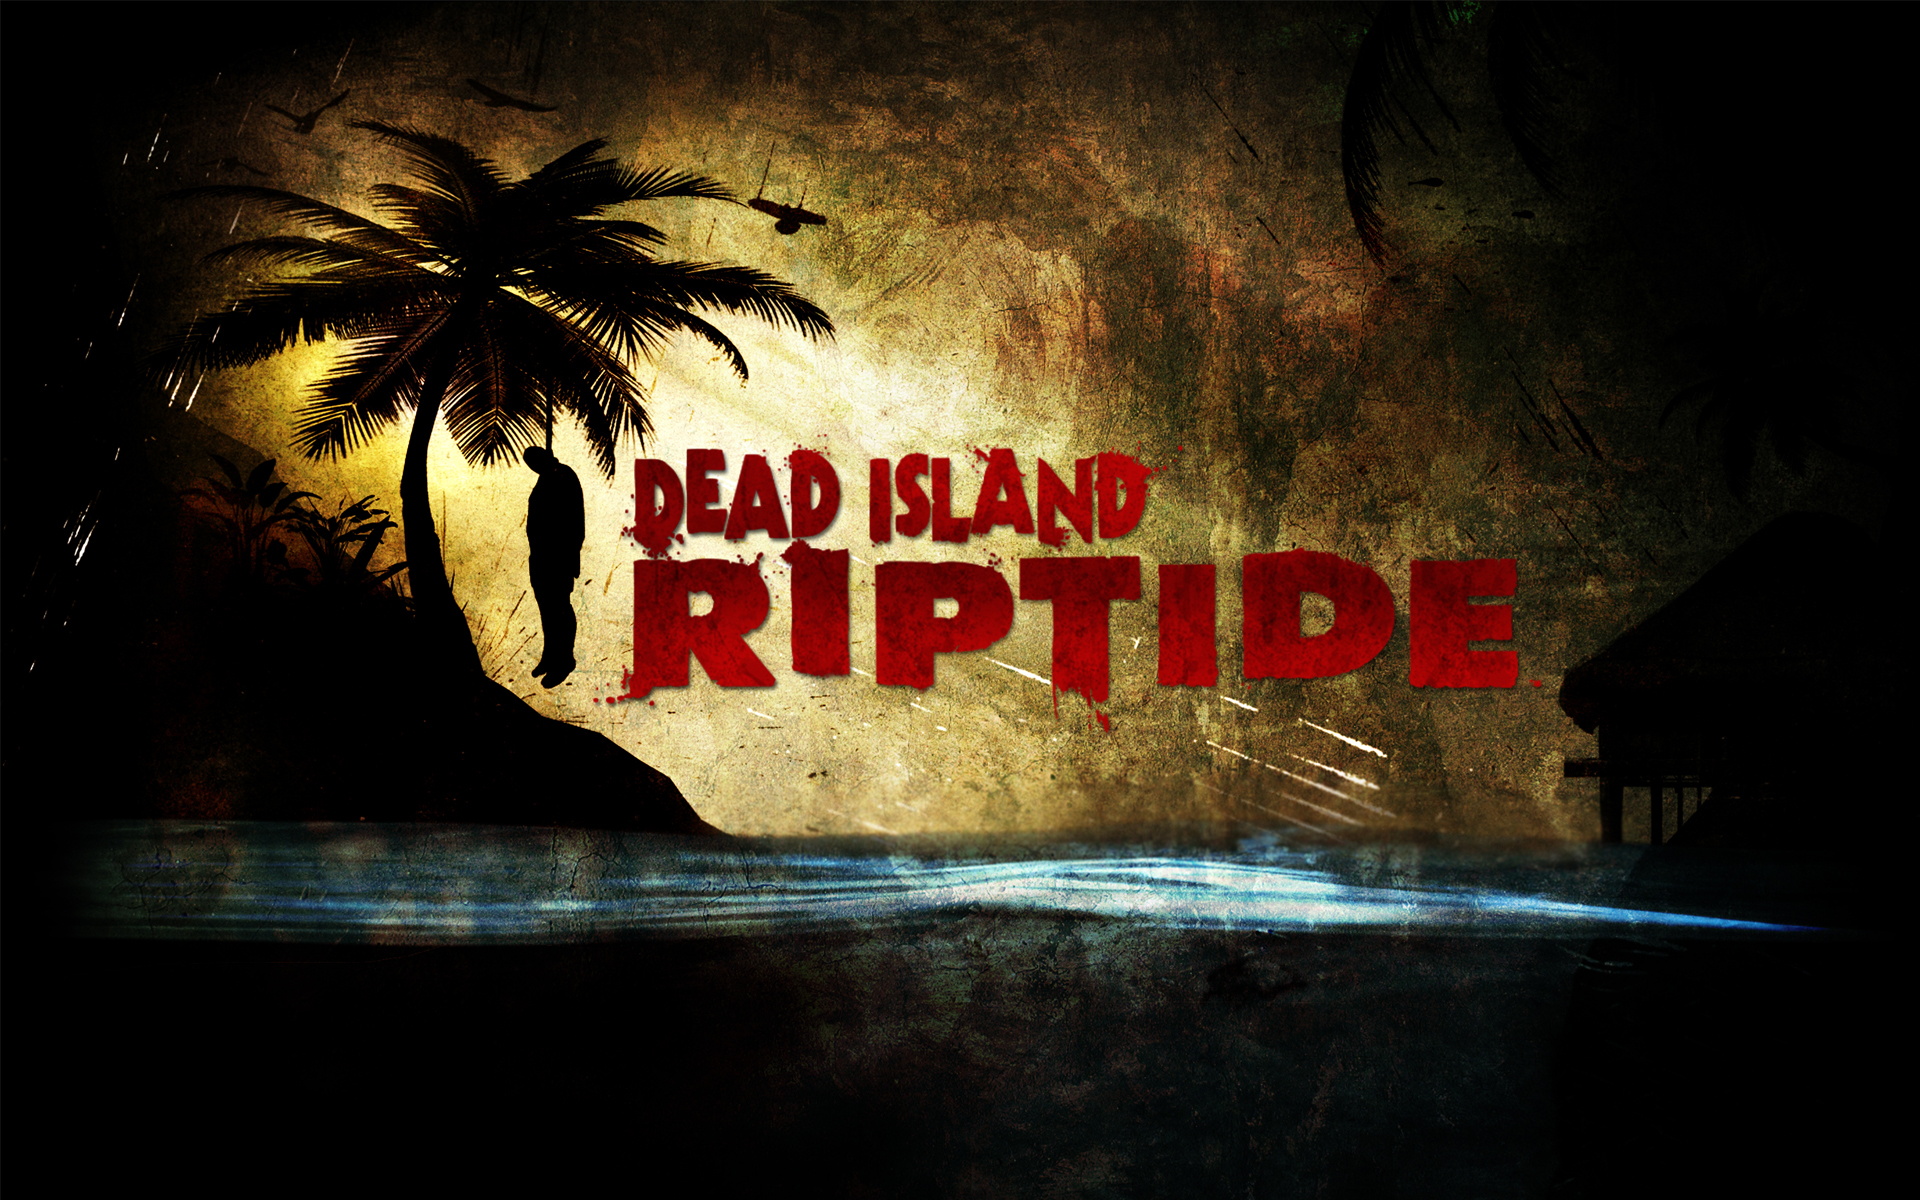 Dead Island Riptide review: An infected open-world